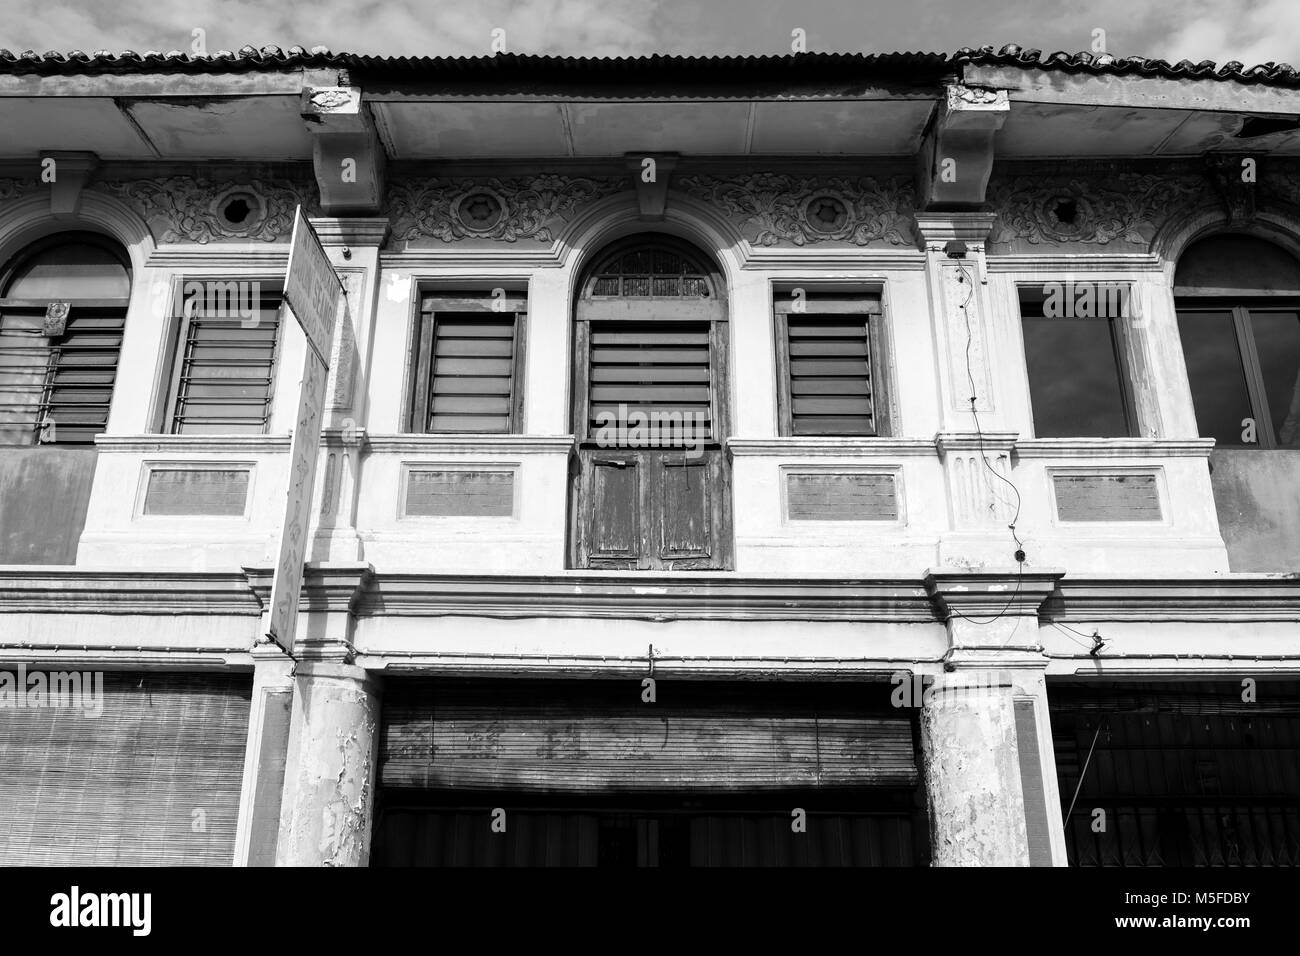 George Town, Malaysia, December 19 2017: Facade of the old building located in UNESCO Heritage Zone, Penang in Malaysia Stock Photo